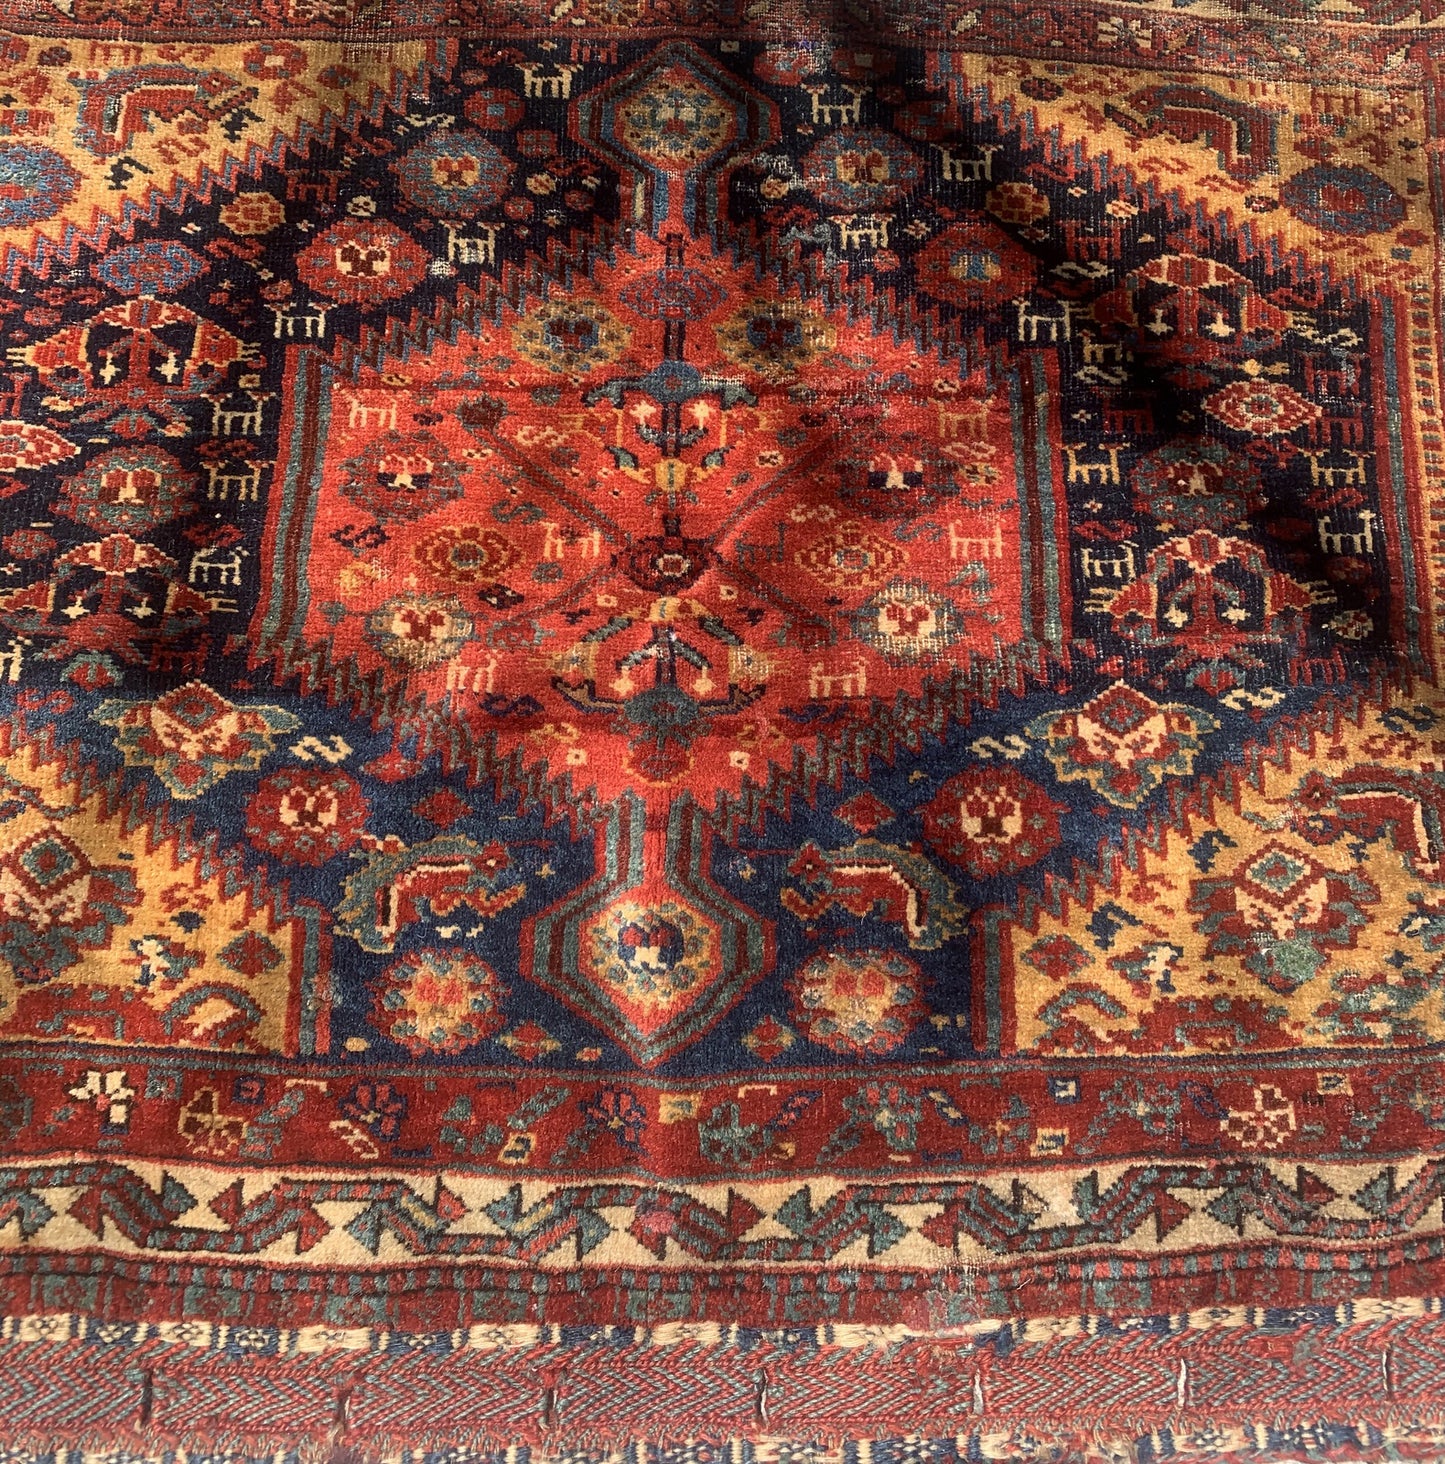 Handmade antique Persian collectible Gashkai bagface. The rug is from the end of 19th century in original condition, it has some signs of age.